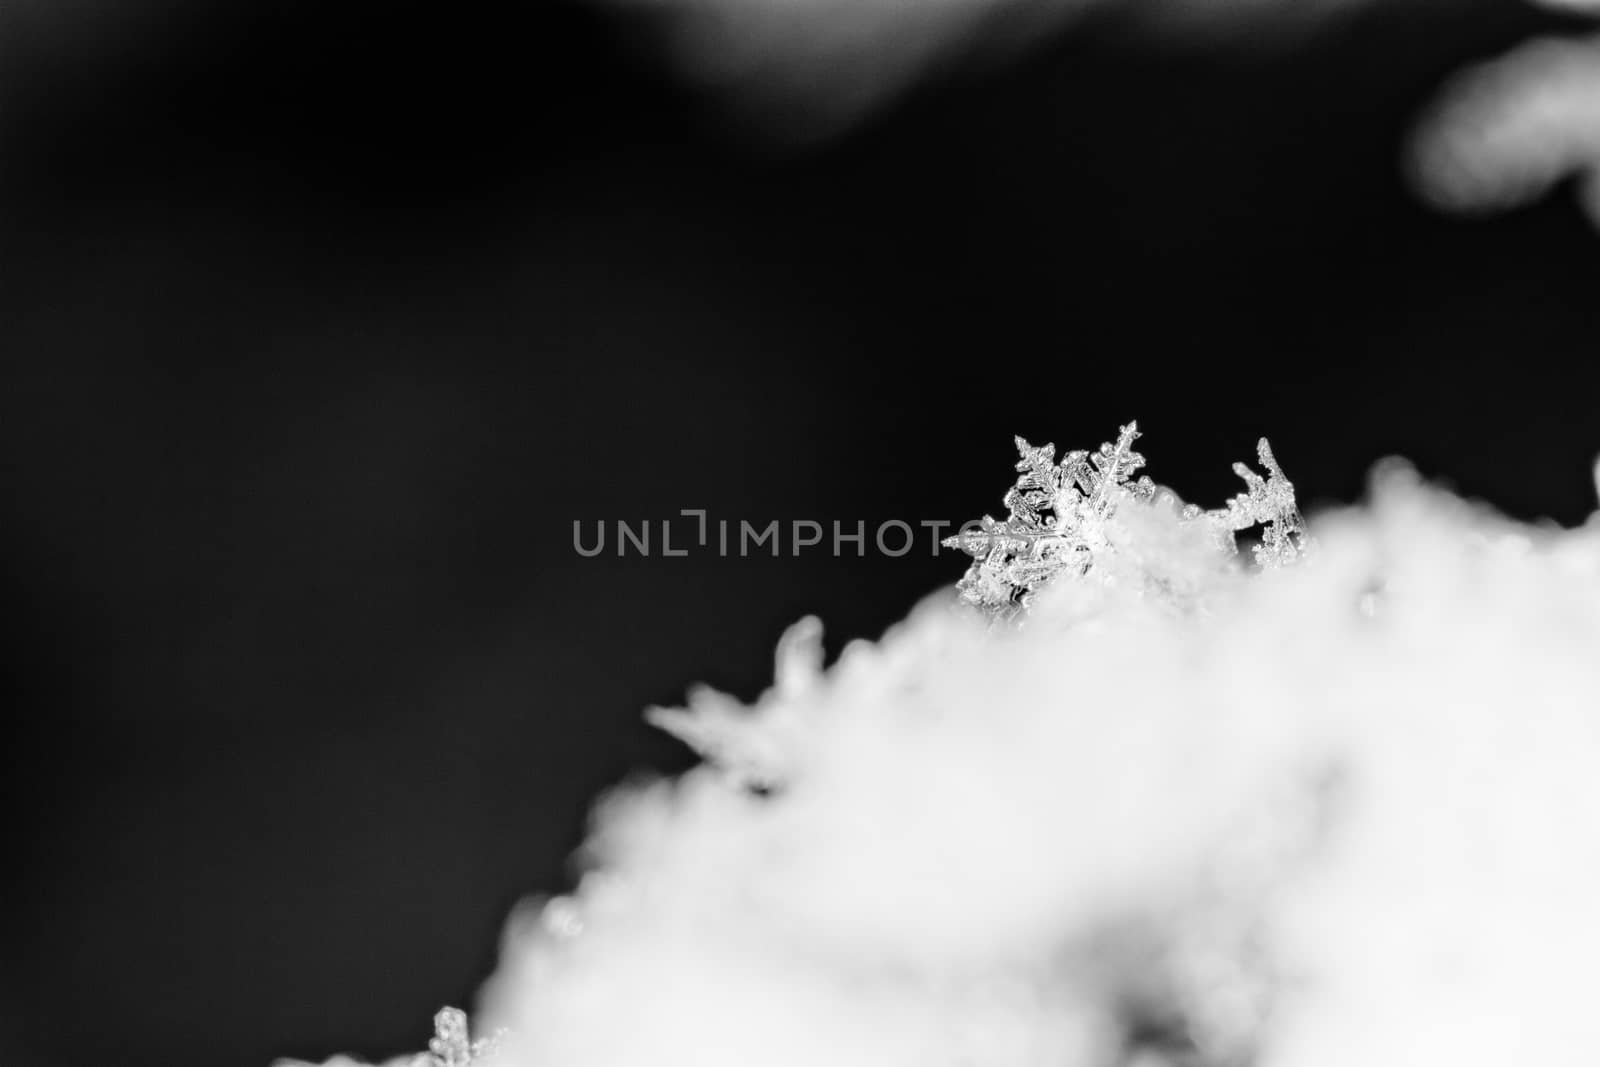 beauty white snowflake crystals on dark background